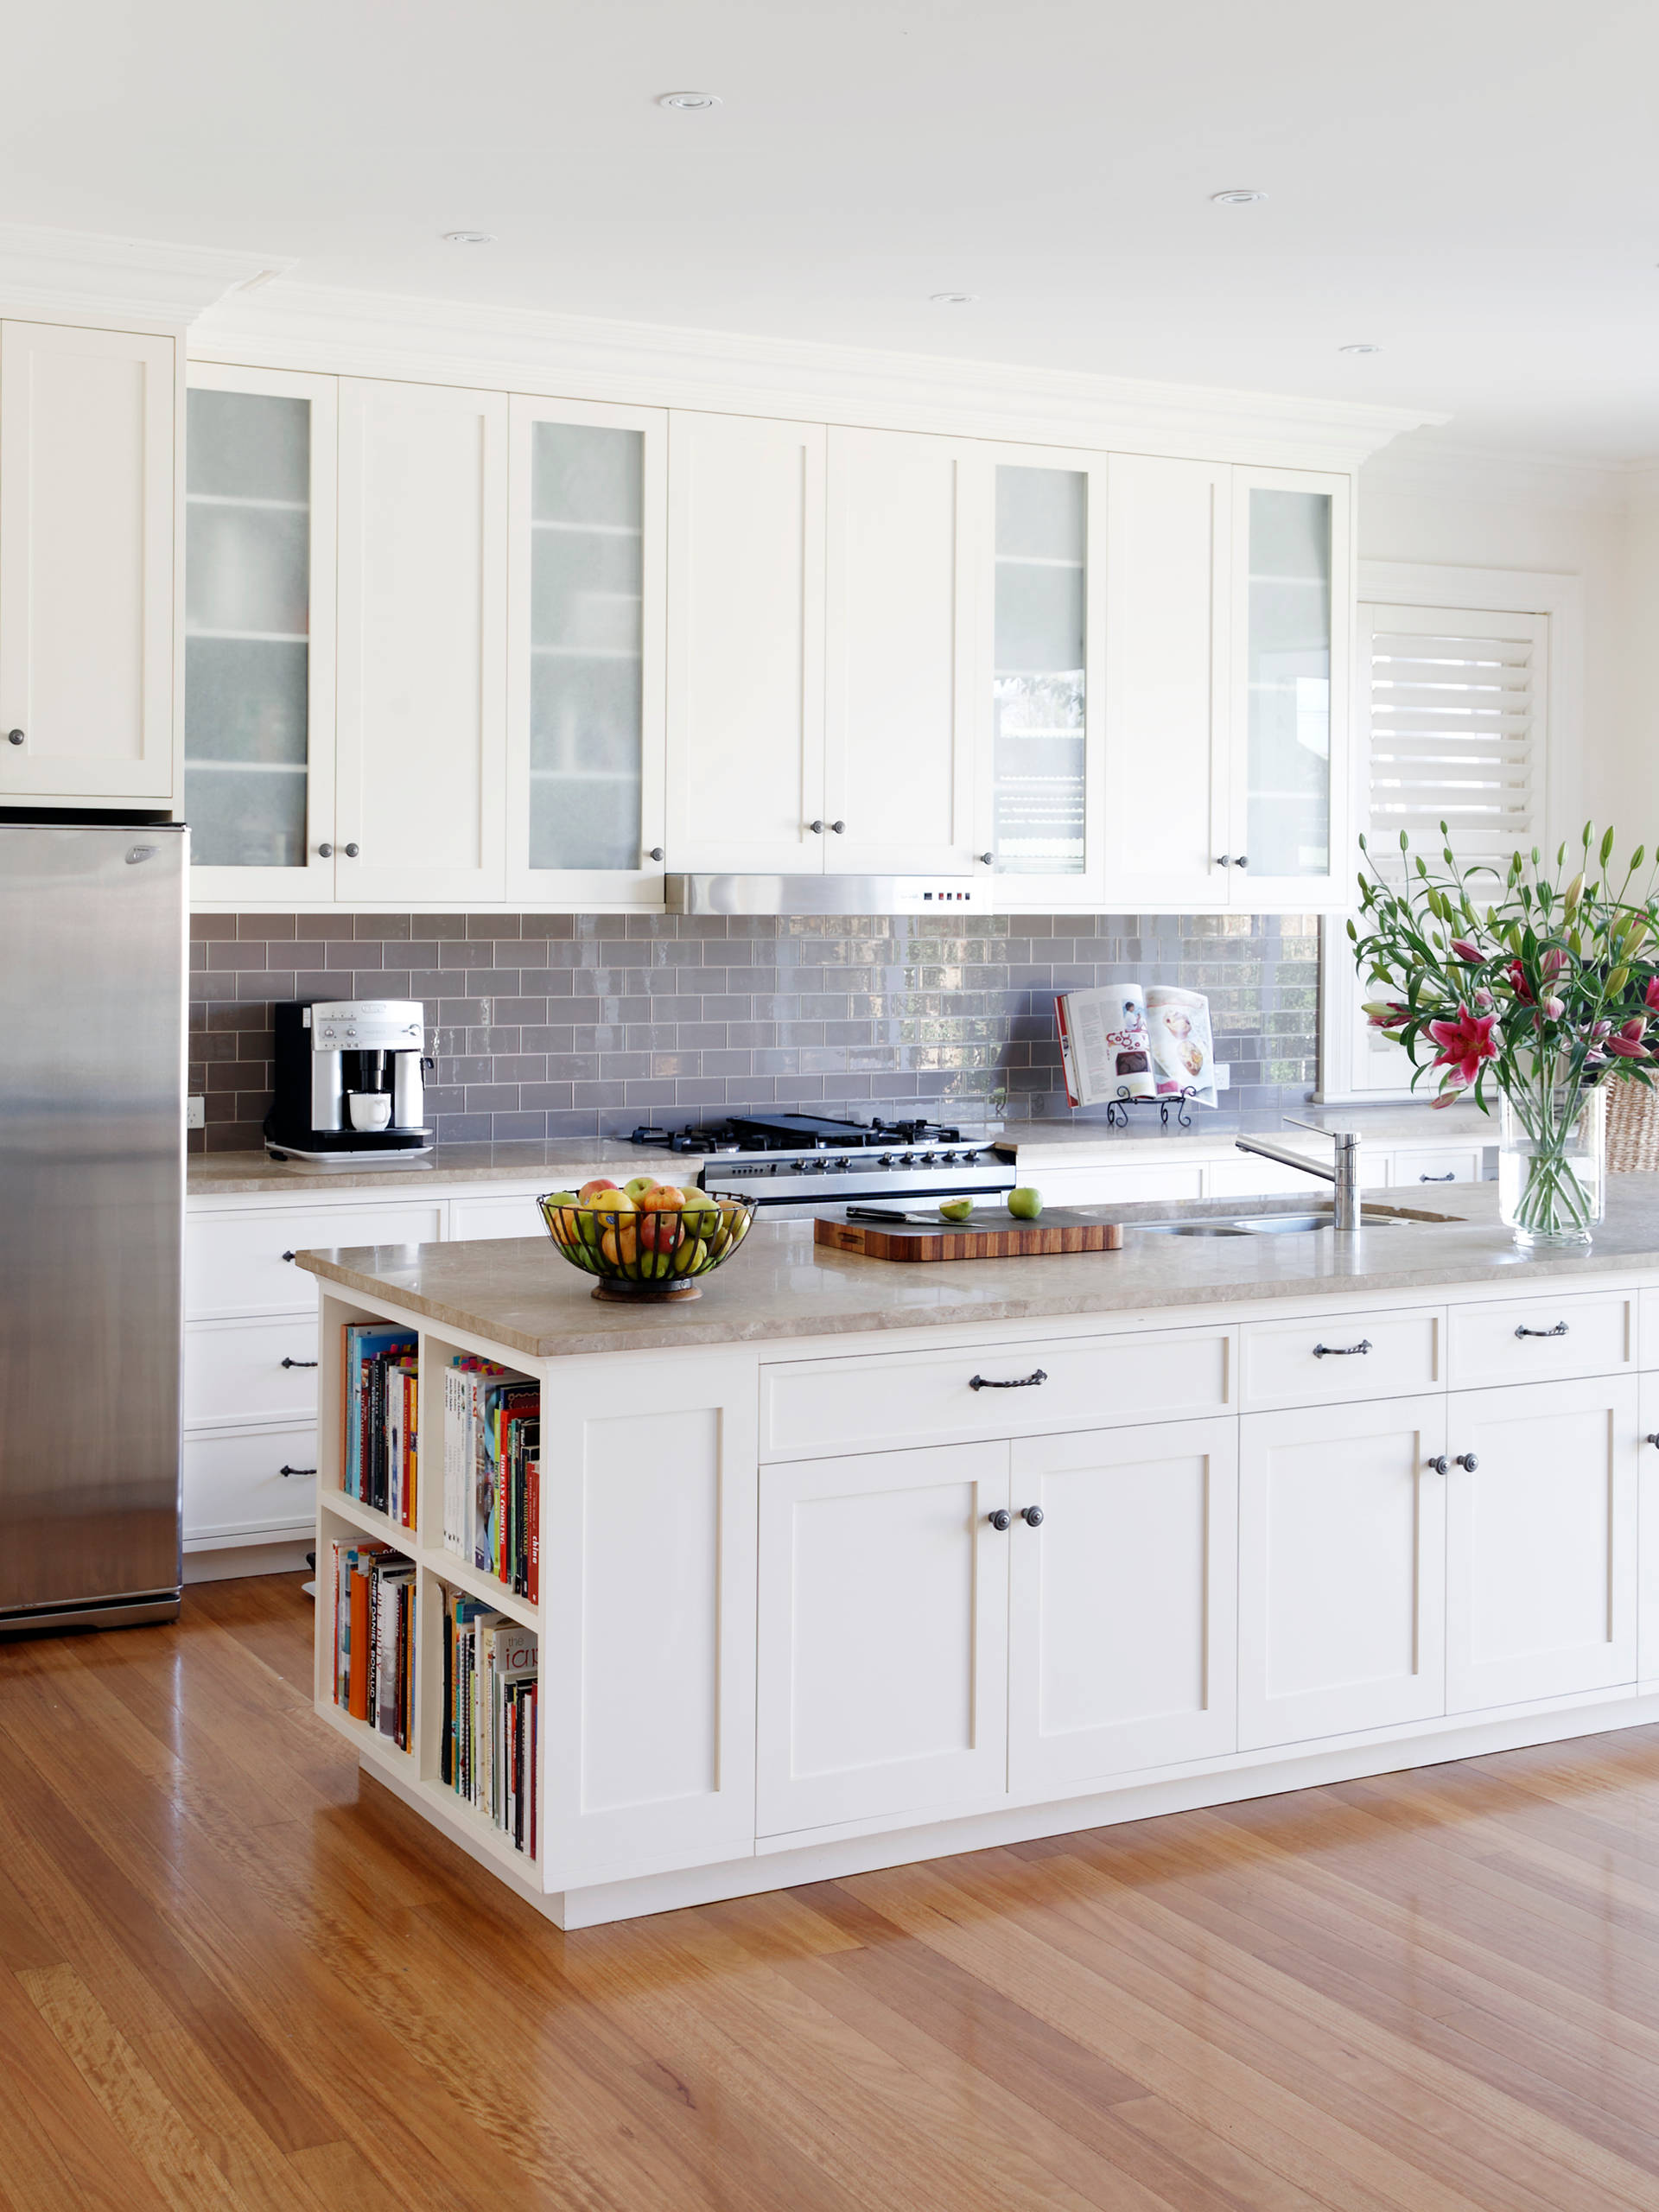 White Frosted Glass Kitchen Houzz, White Cabinet With Frosted Glass Doors